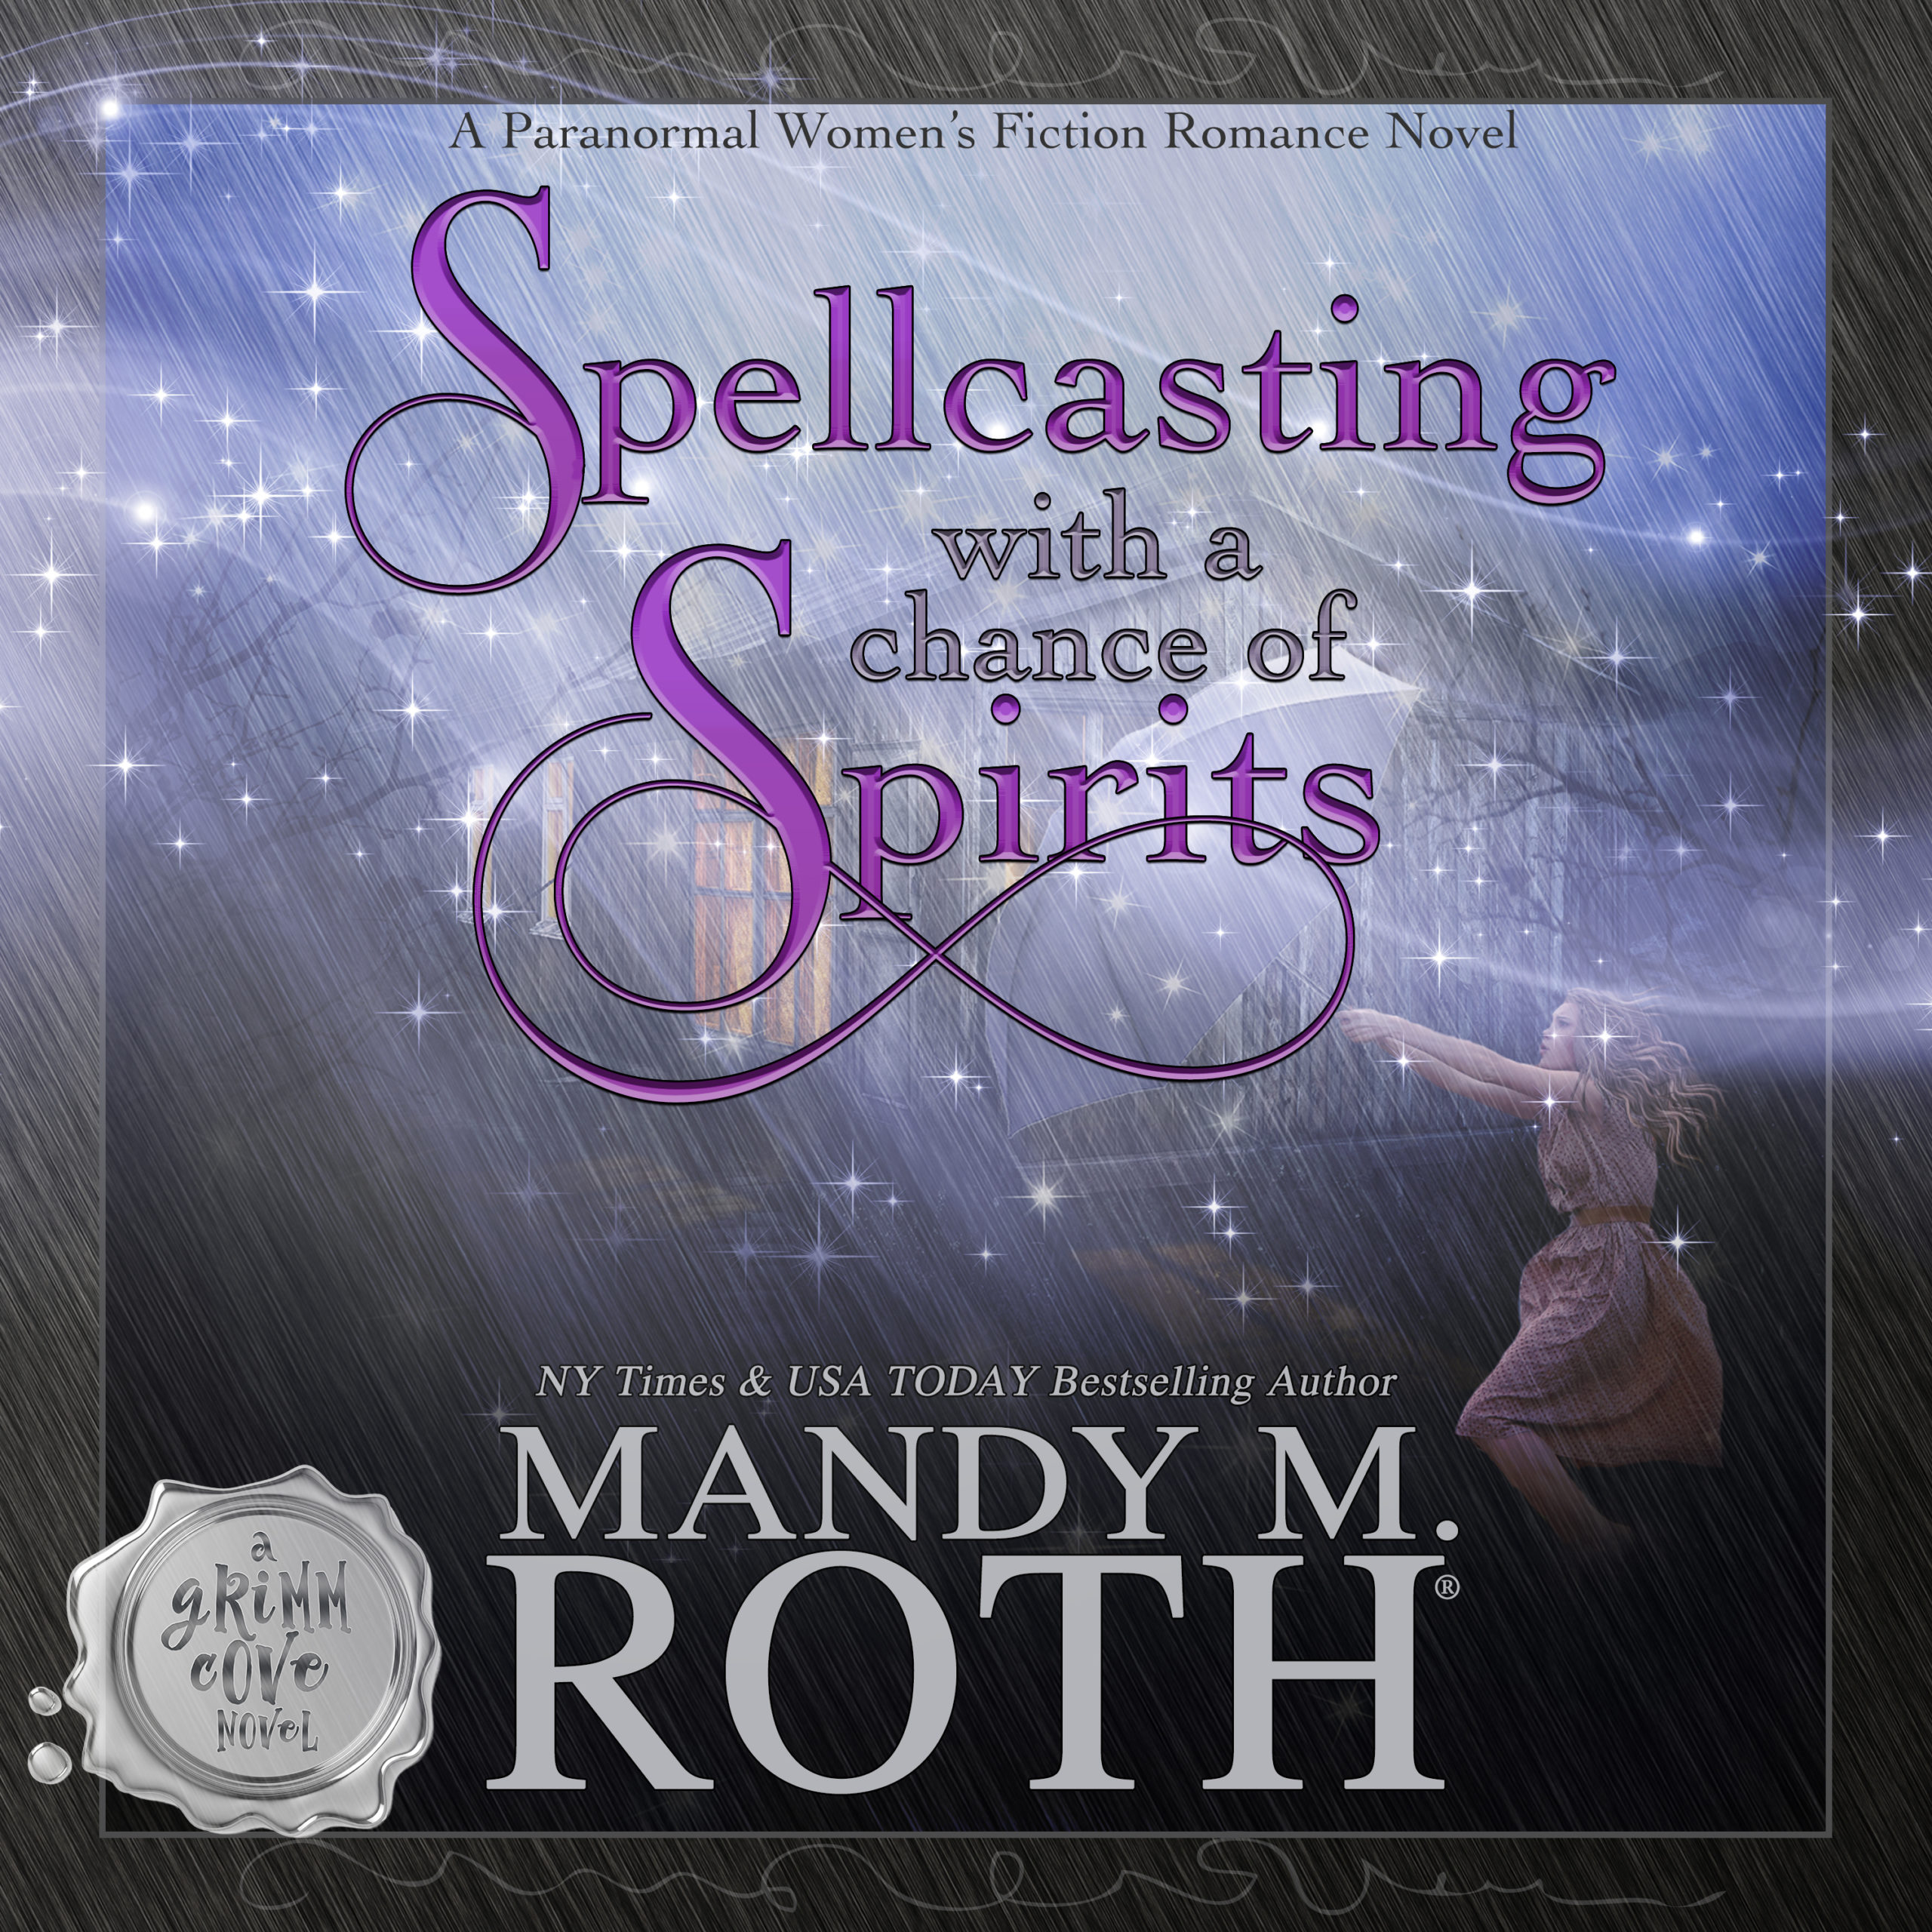 Spellcasting with a Chance of Spirits by Mandy M. Roth